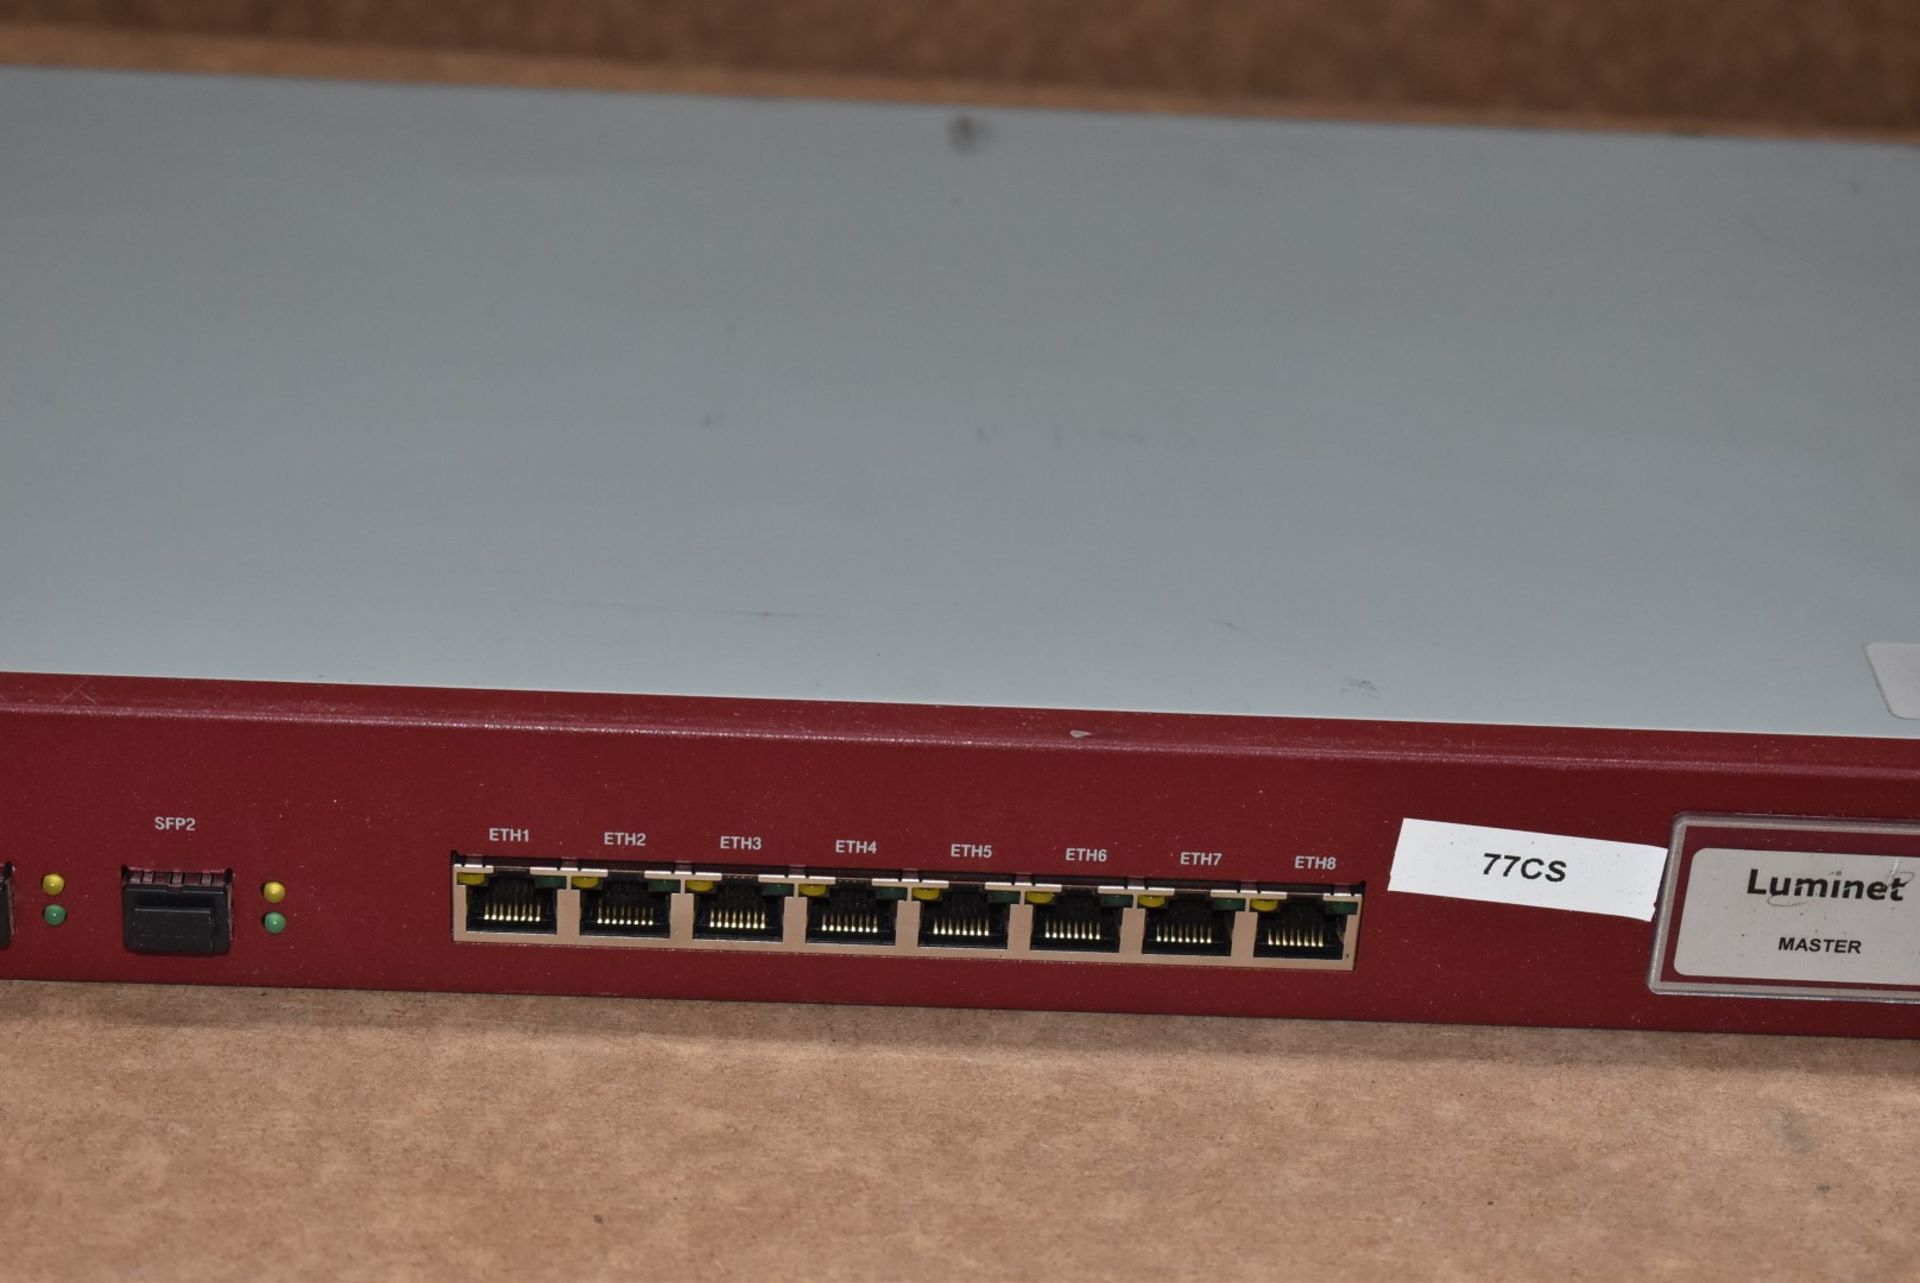 1 x Teldat Bintec RXL12100 Gigabit Ethernet Wireless Router - RRP £1,499 - Includes Power Cable - - Image 3 of 8